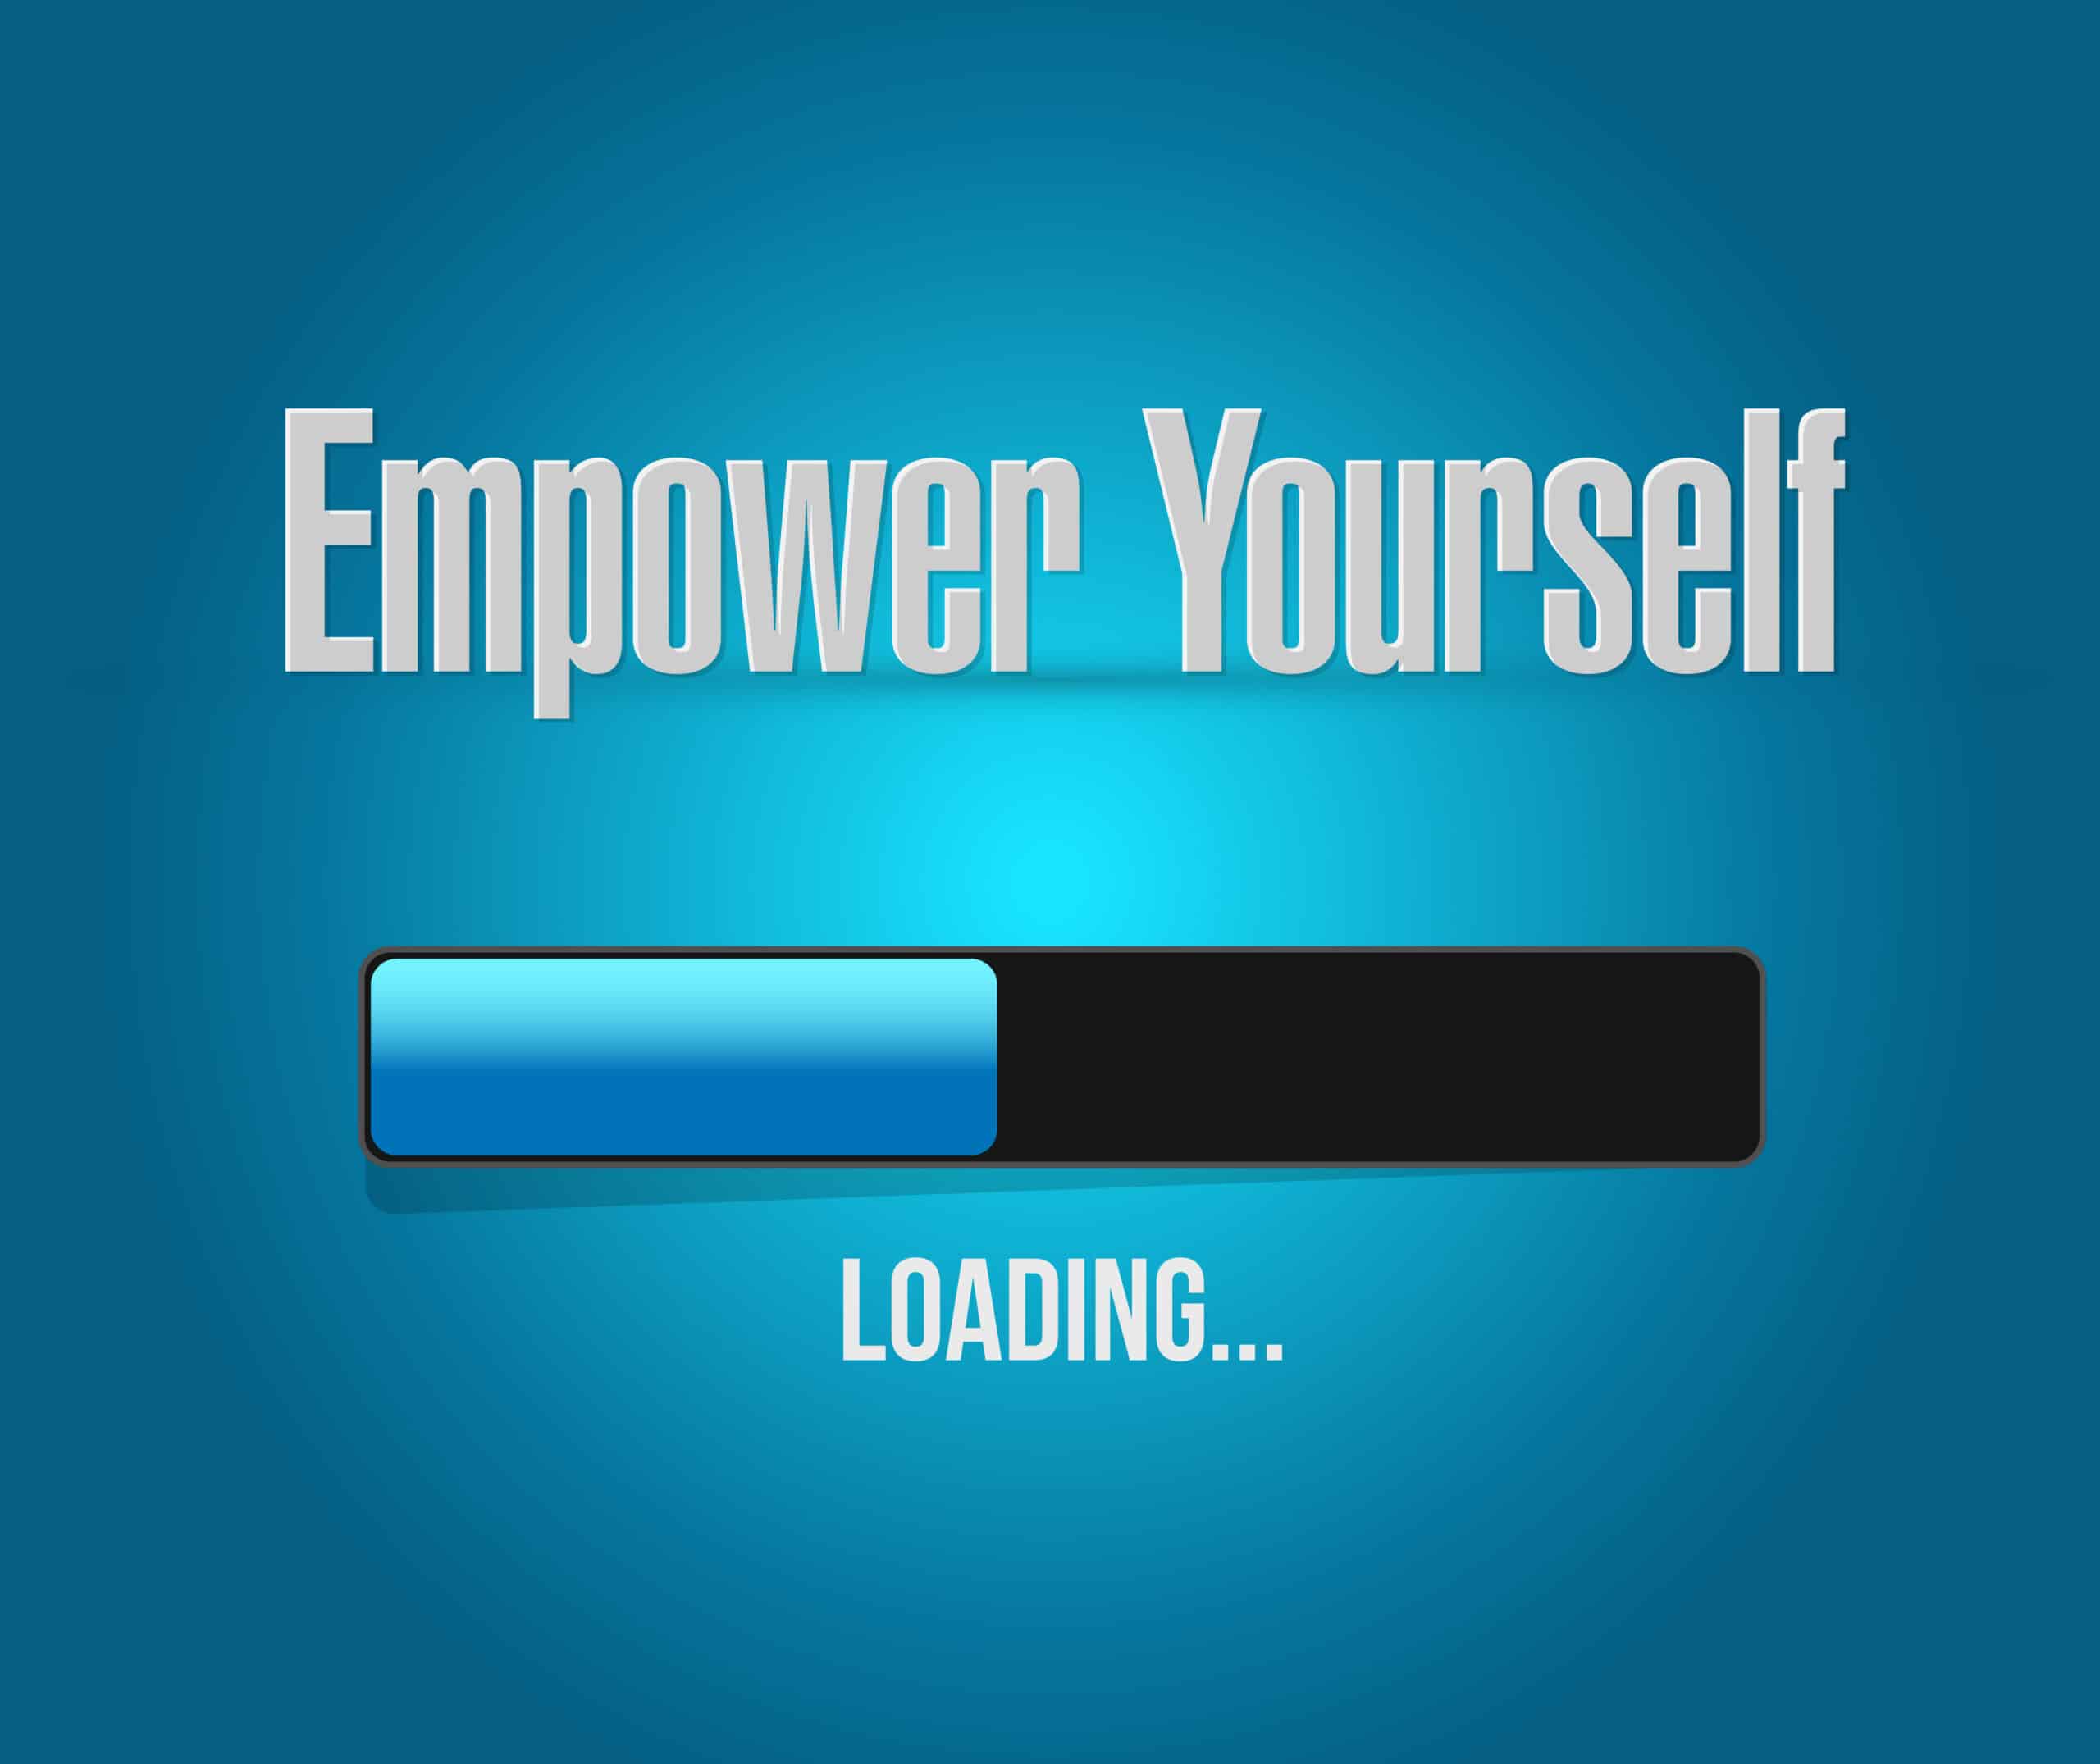 Empower Yourself loading bar sign concept illustration design graphic